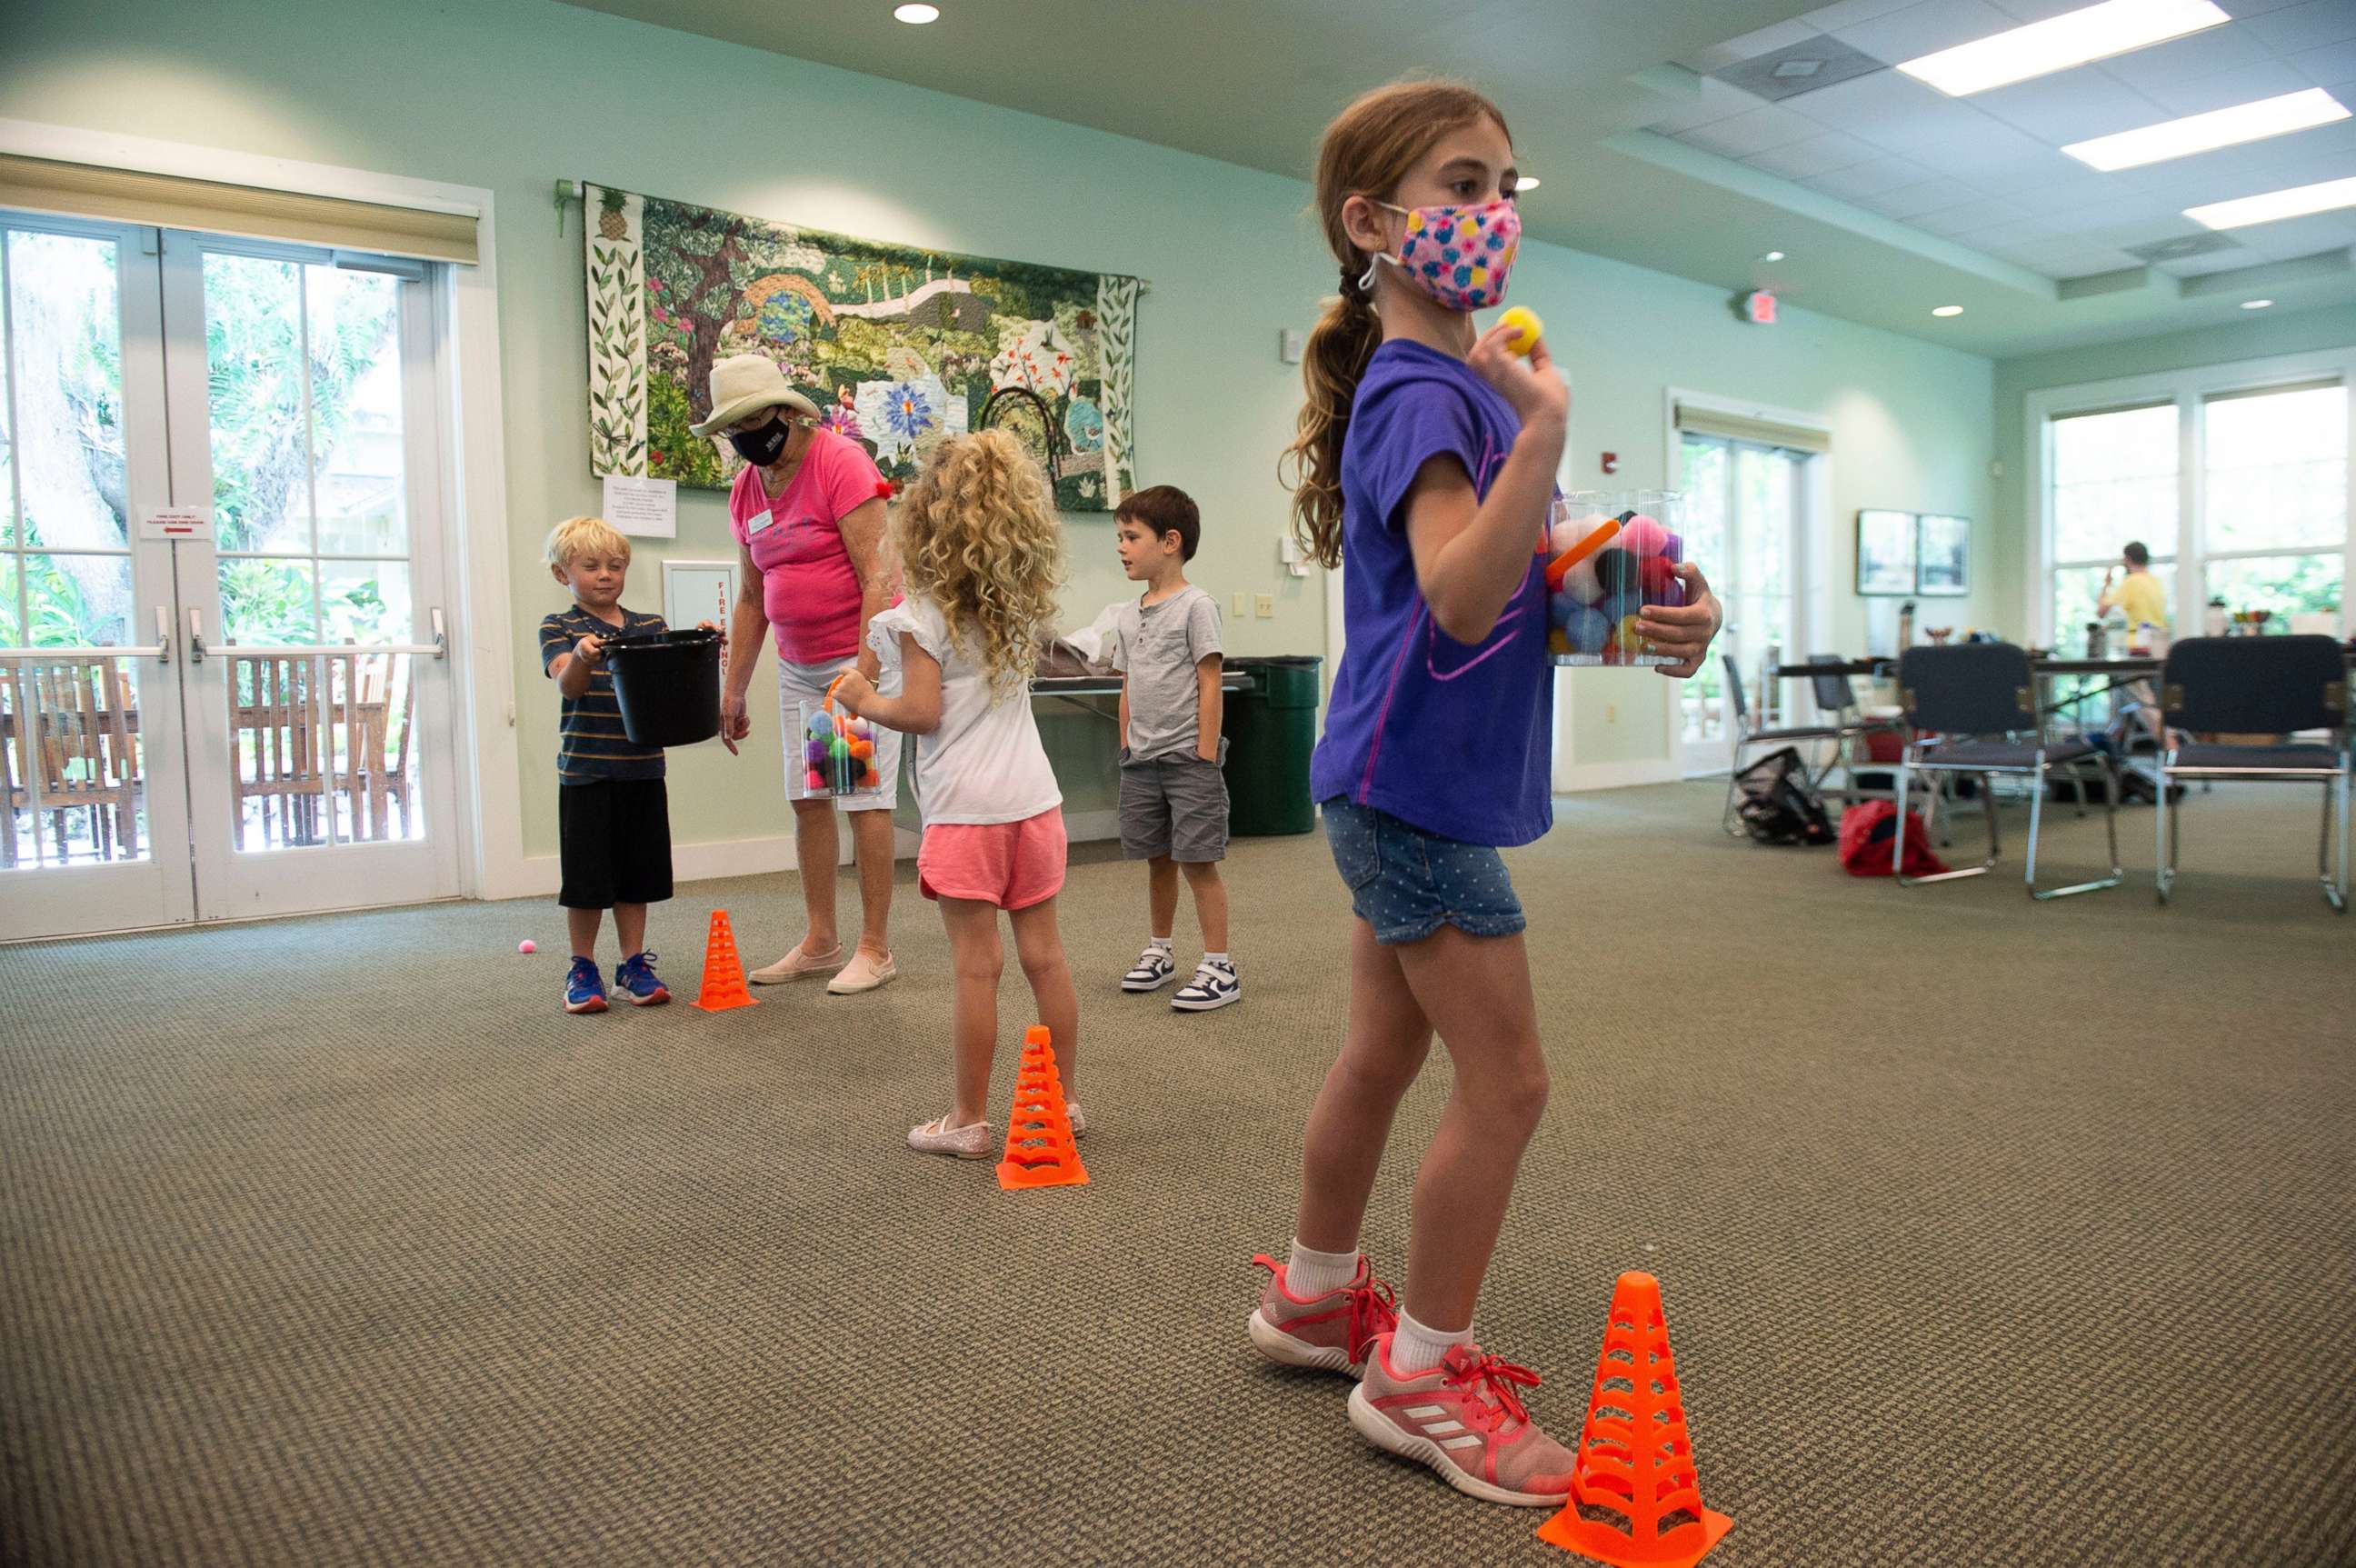 PHOTO: Campers play games while wearing Covid-19 masks at McKee Botanical Garden in Treasure Coast, Fla., March 25, 2021.